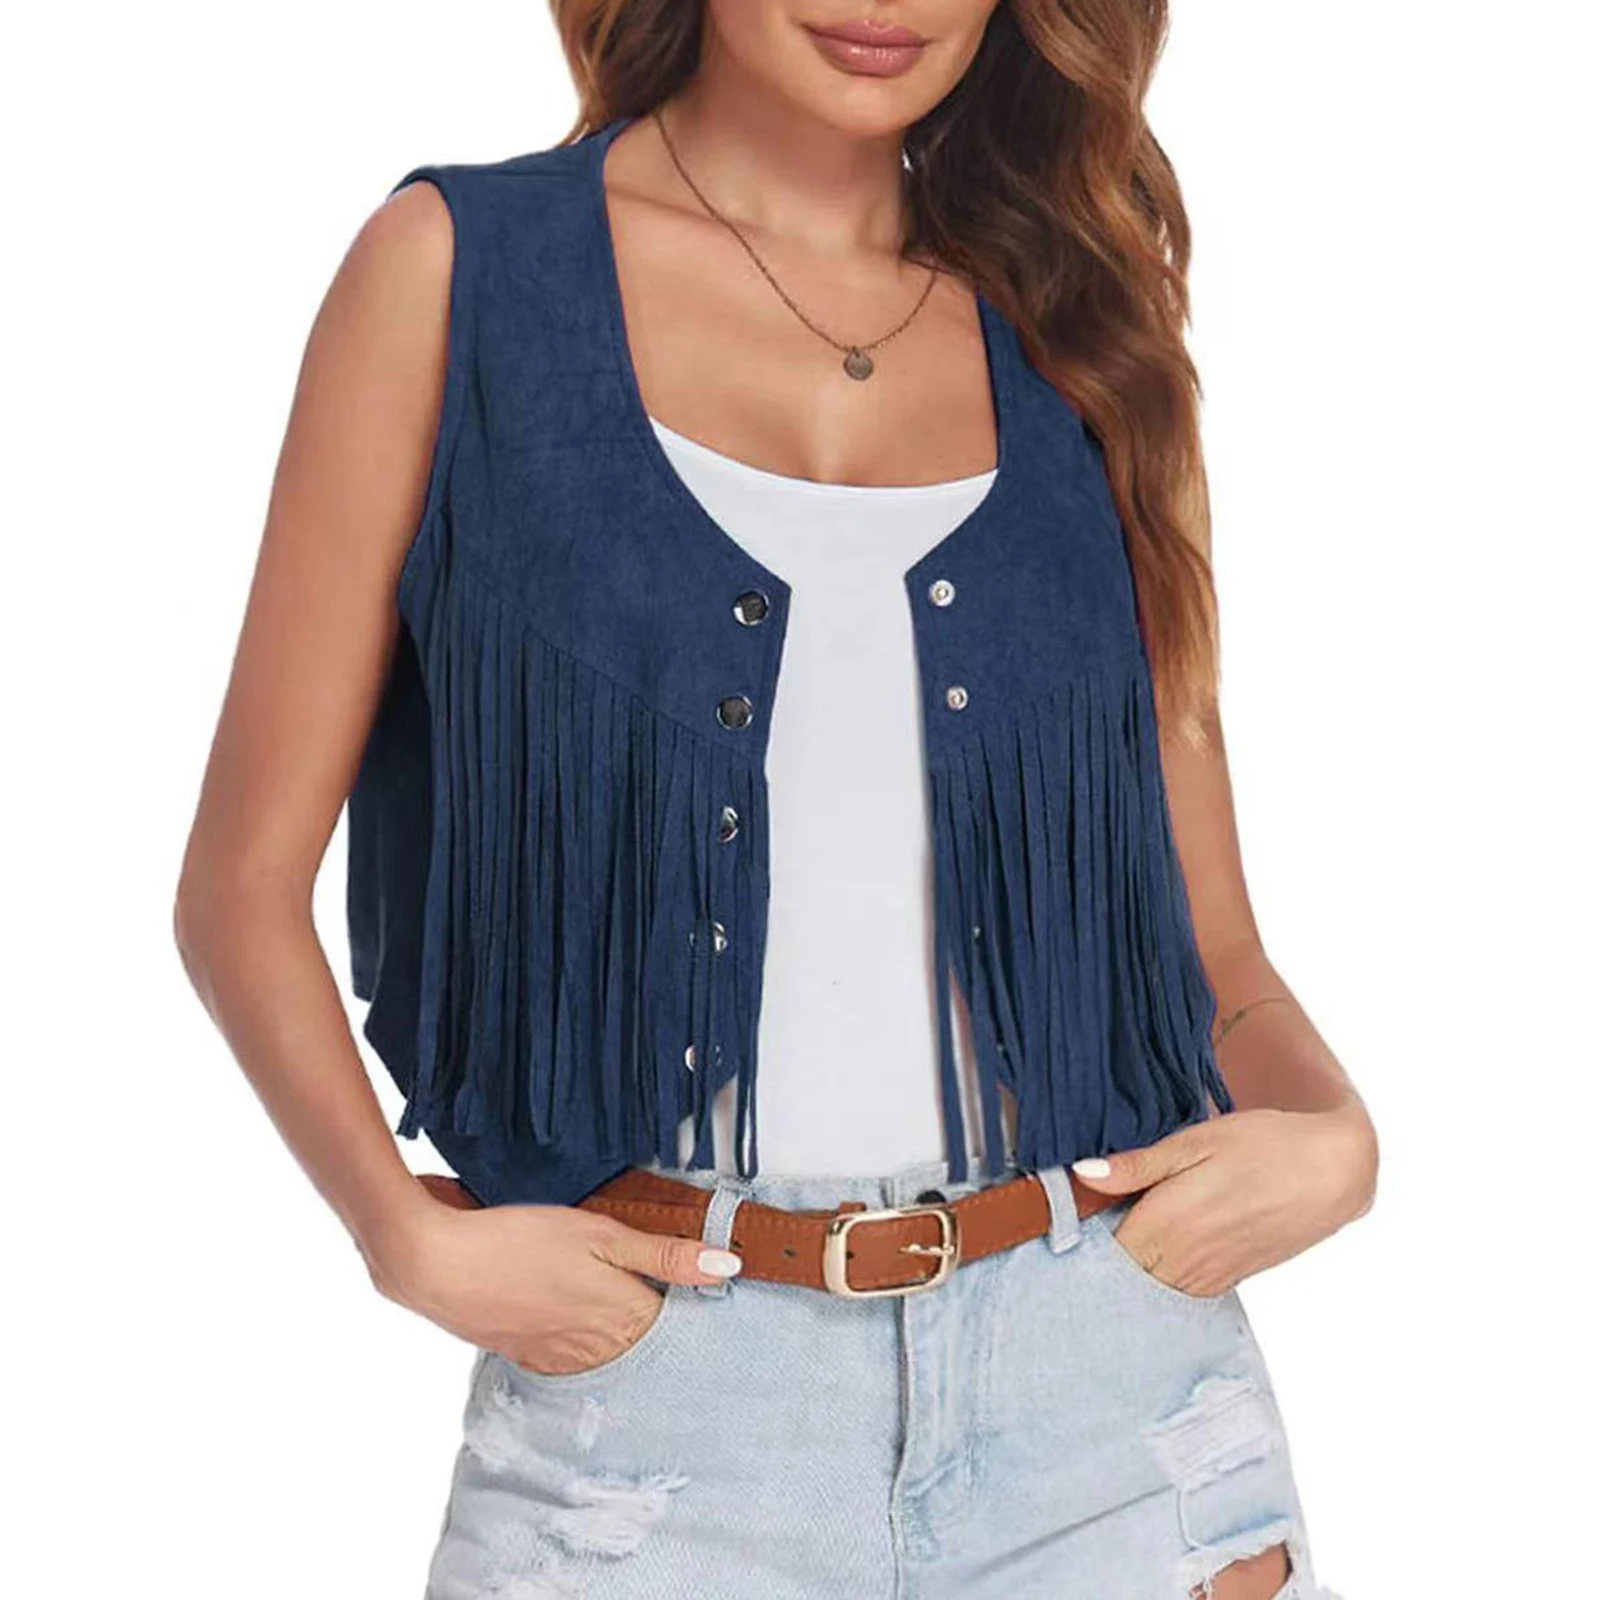 Womens Punk Vintage Fringe Vest Faux Suede Tassel Waistcoat Irregular Hem Sleeveless Jacket for Halloween Party Rock Concert magic ball disco light stage lighting effect with remote controller auto sound control for dj concert party